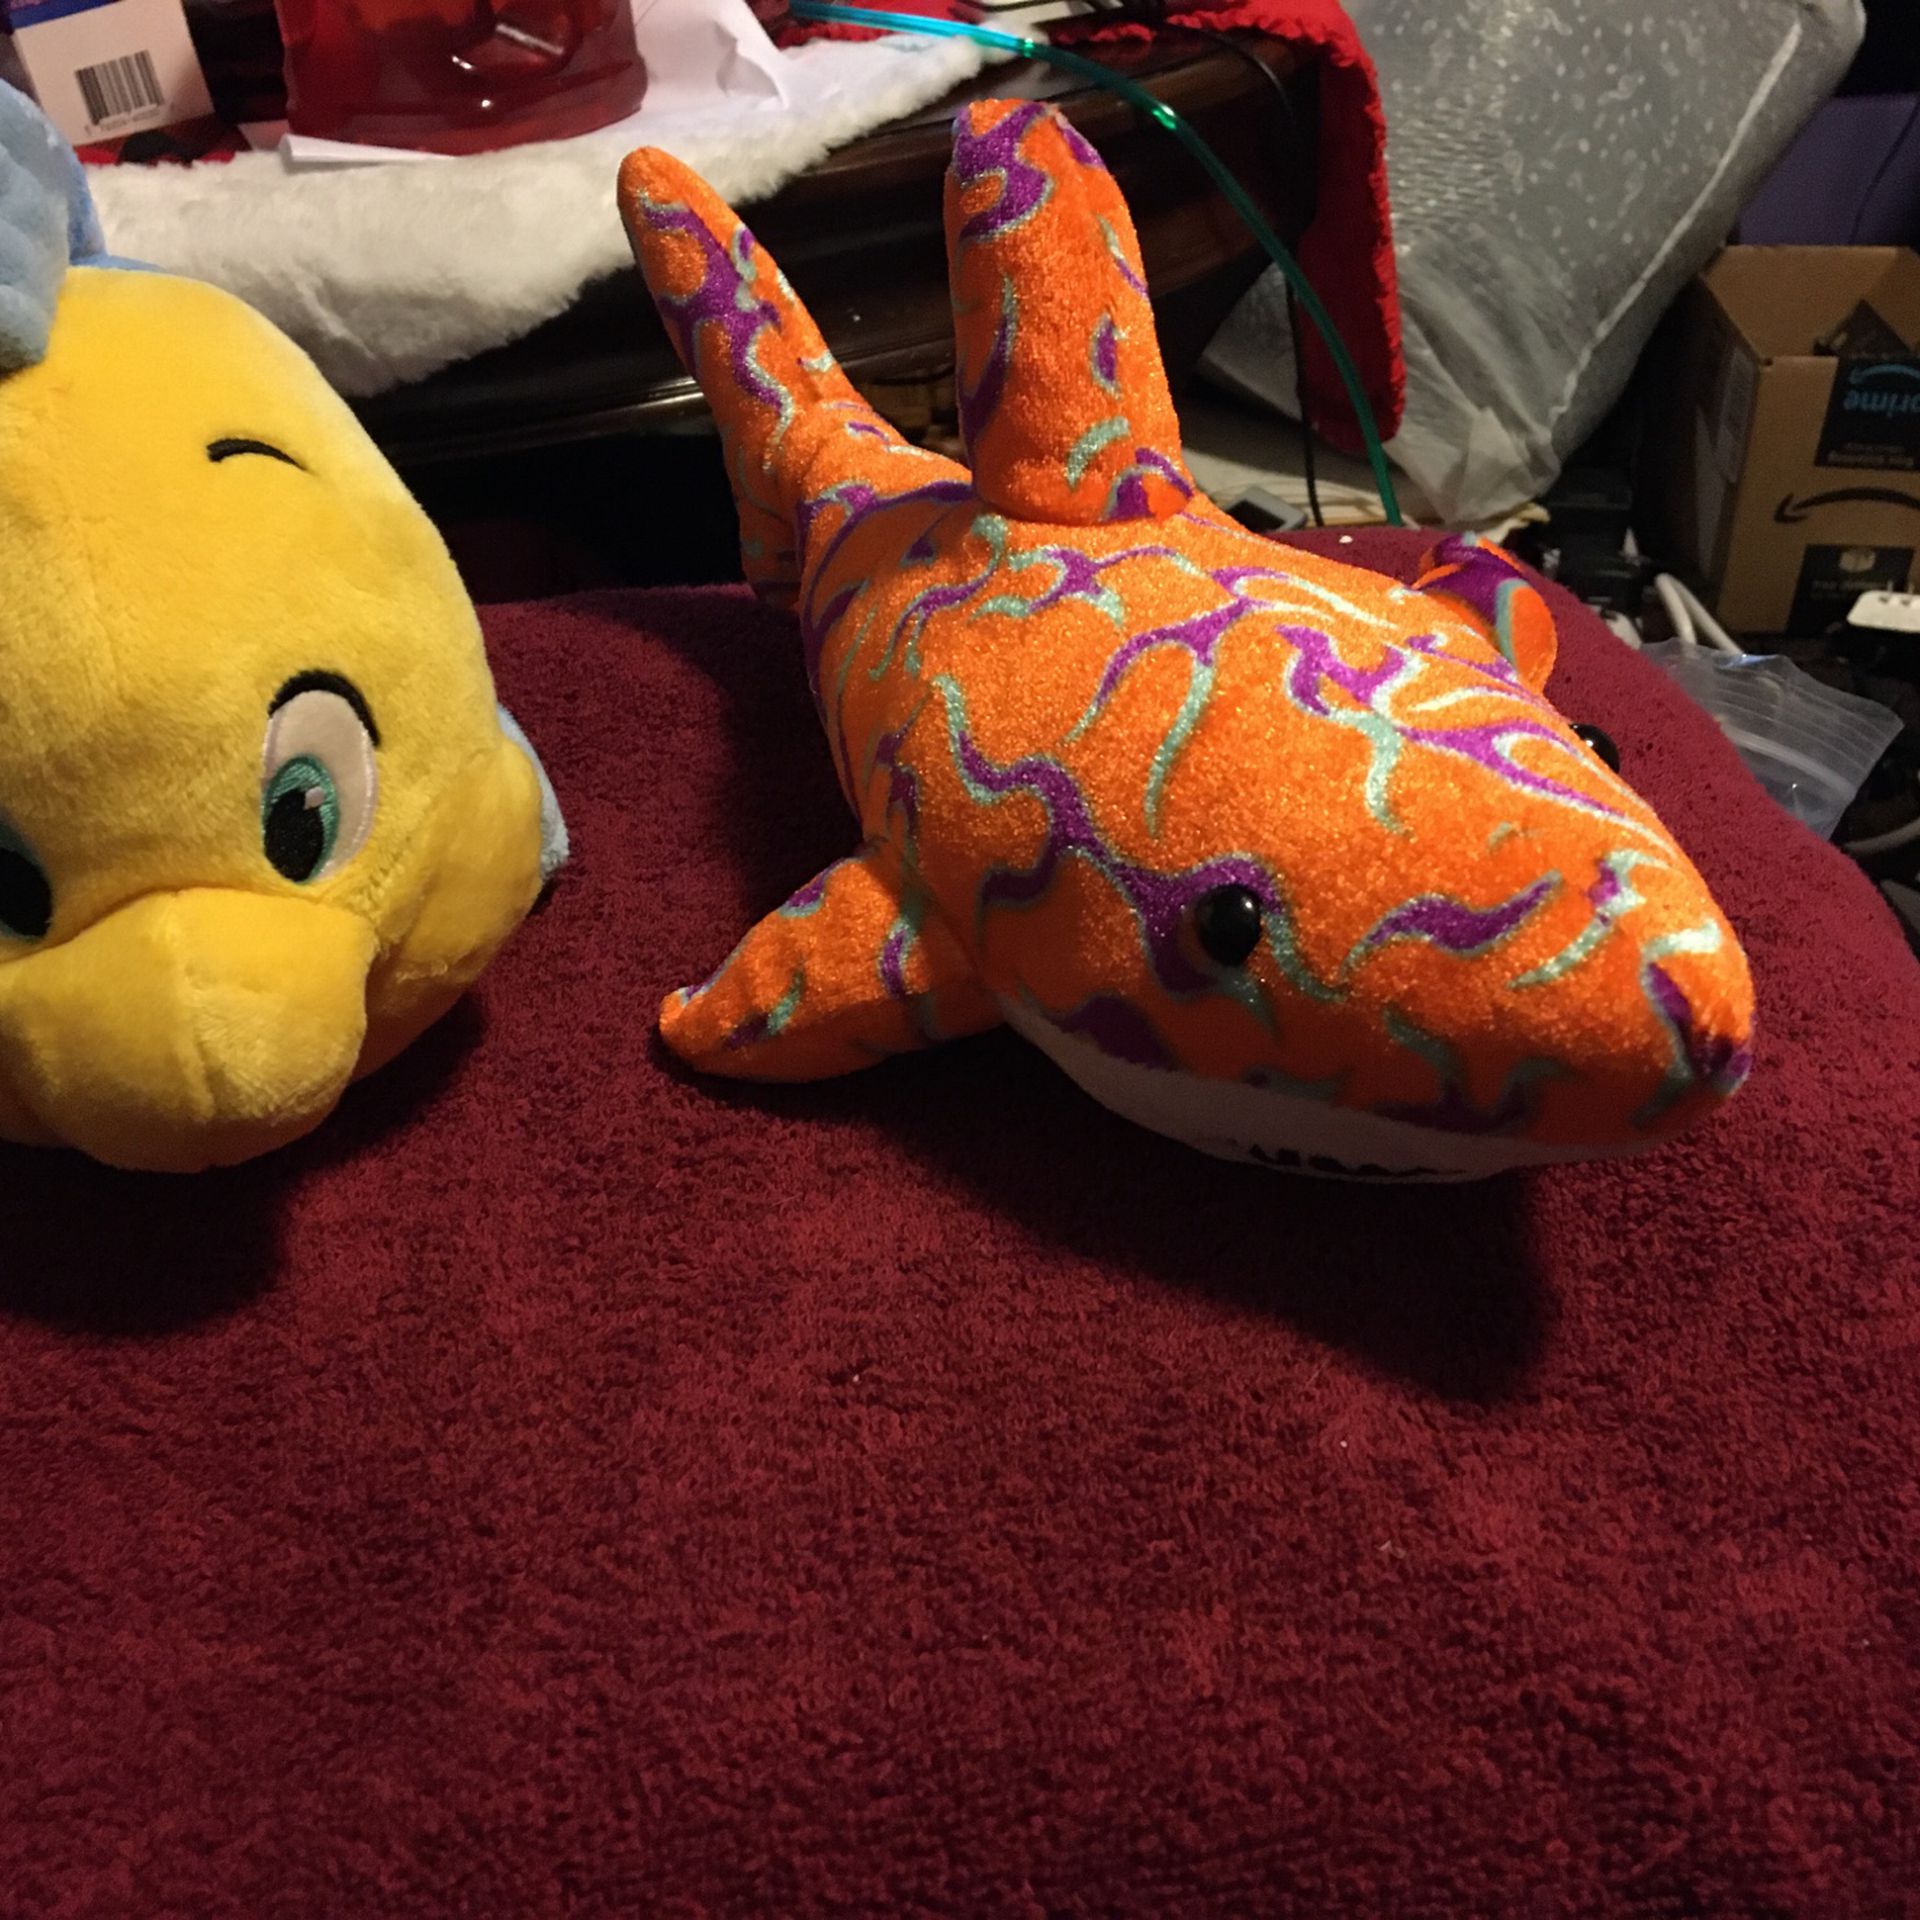 Two Stuff Animal One Fish And Whale For Just 2.00